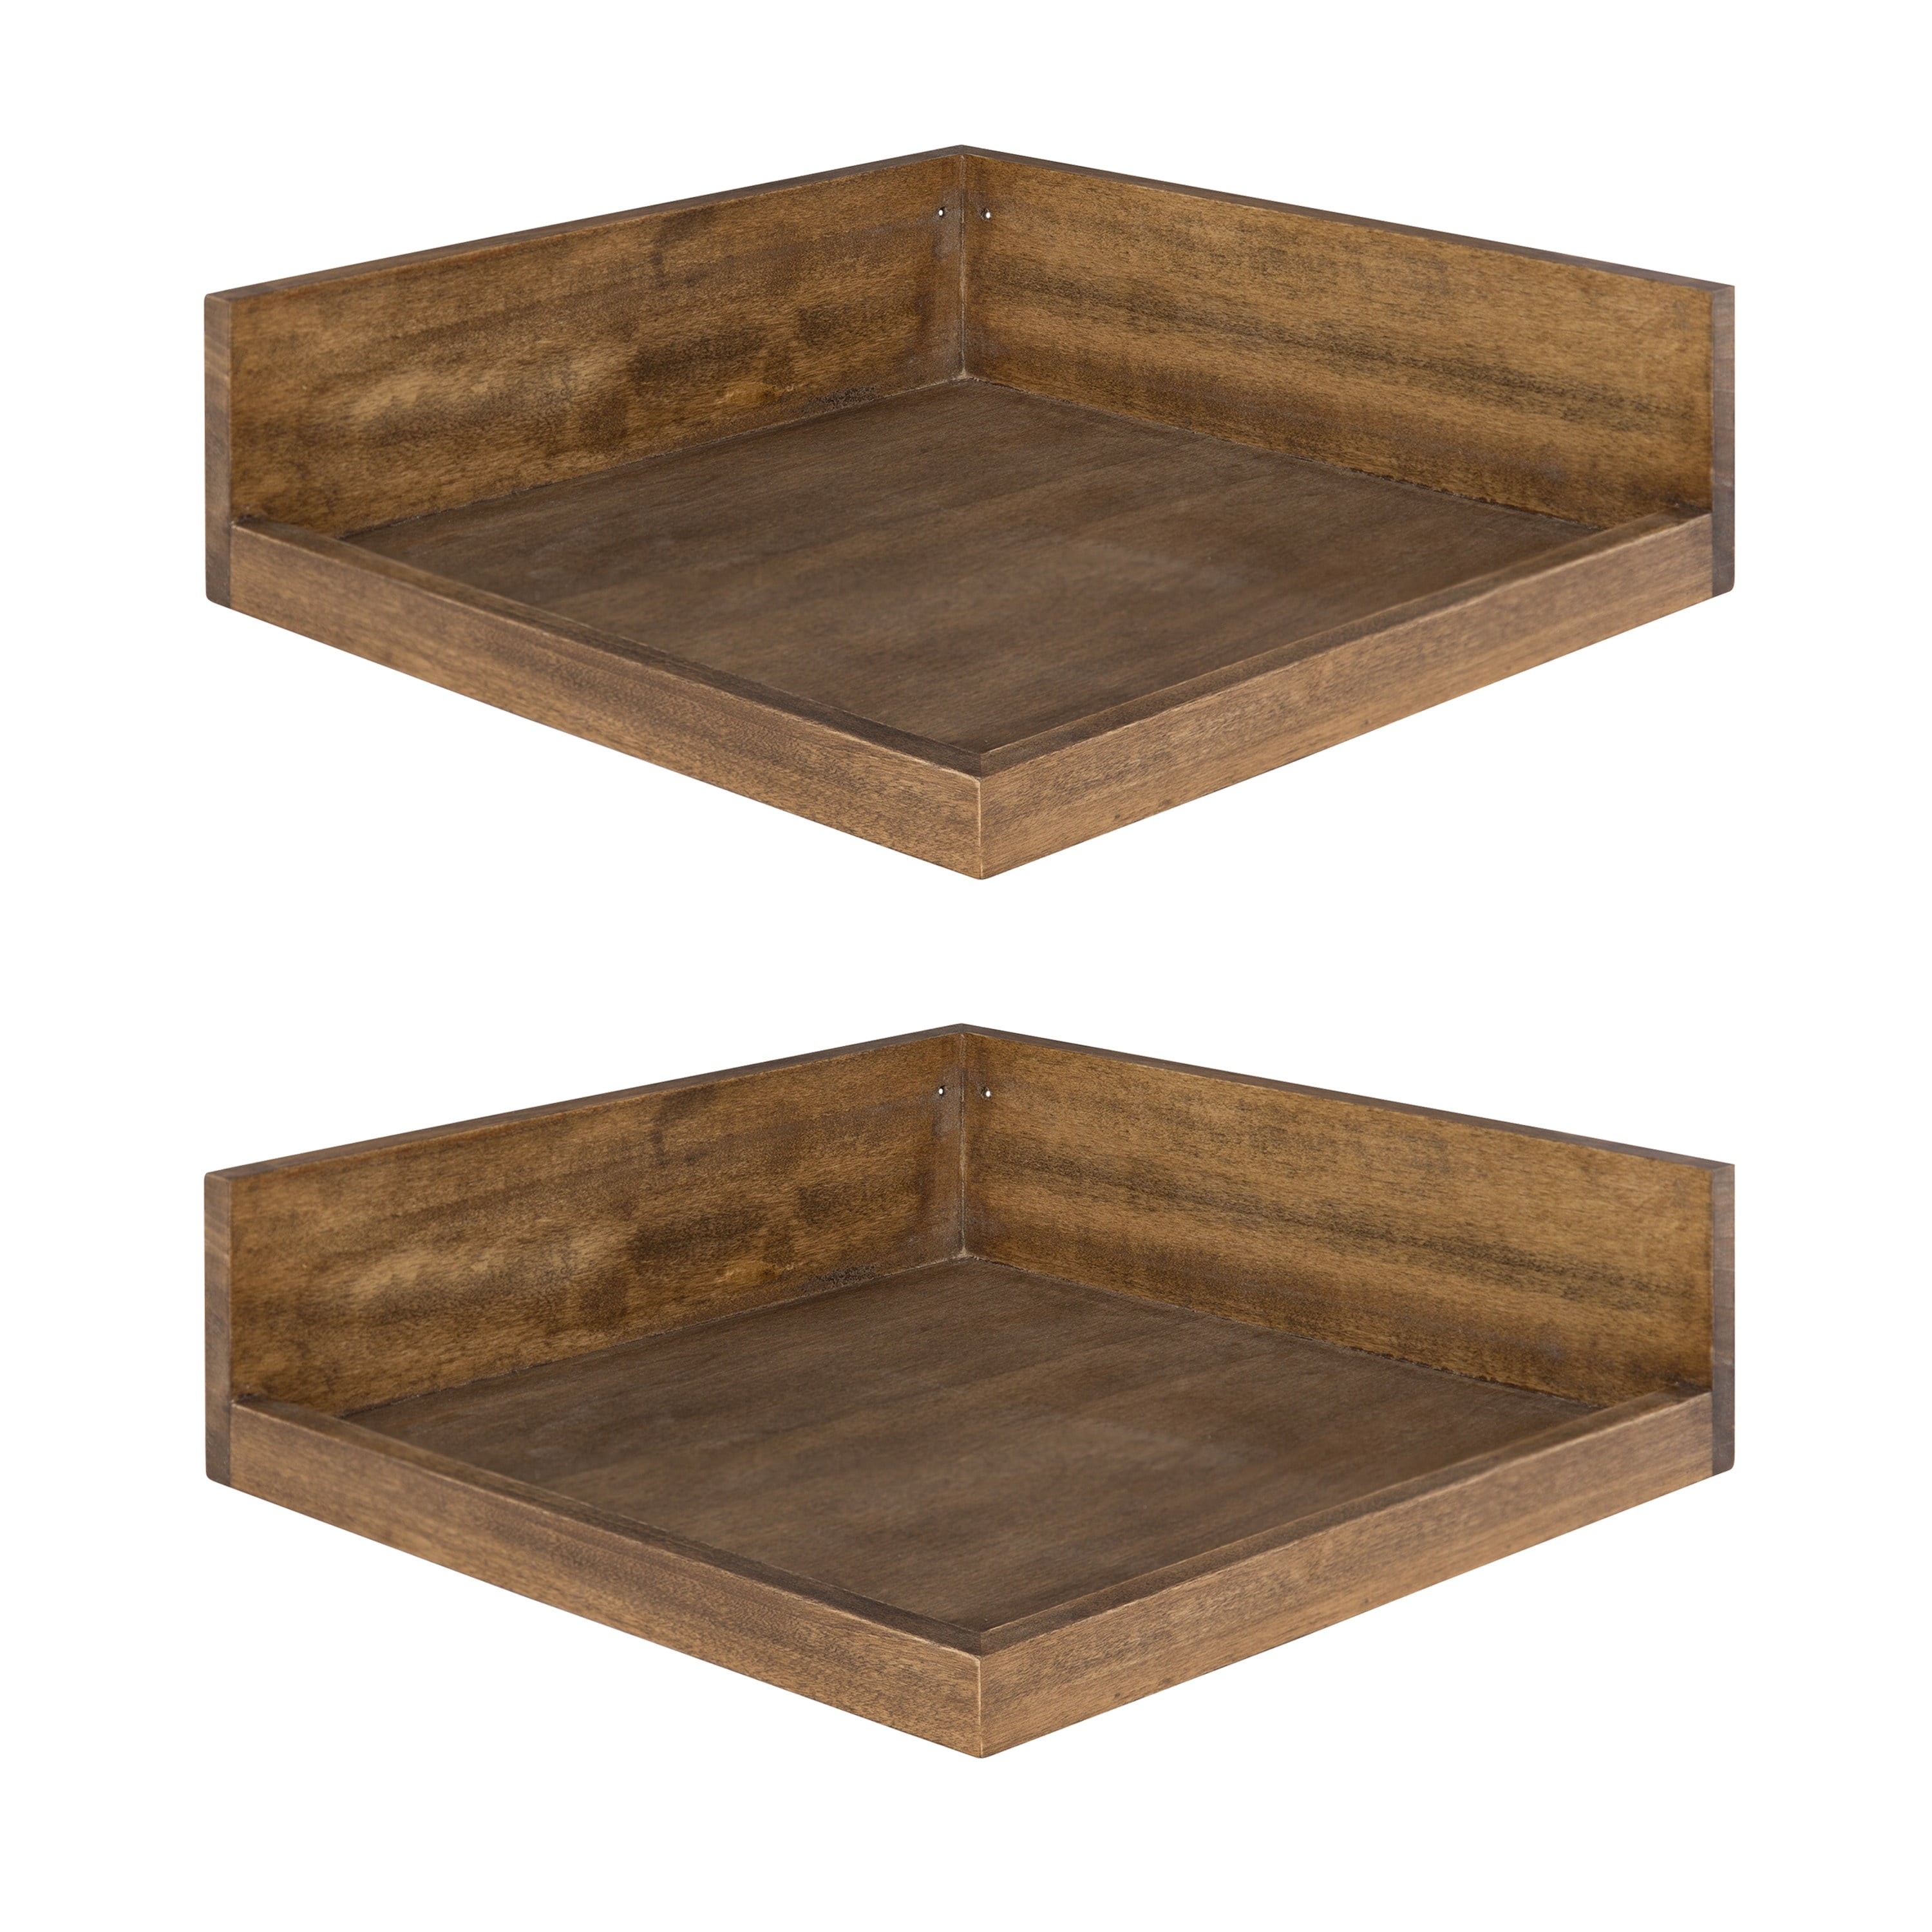 Kate and Laurel Lintz Wood and Metal Floating Wall Shelves - 26x30.5 - Rustic Brown